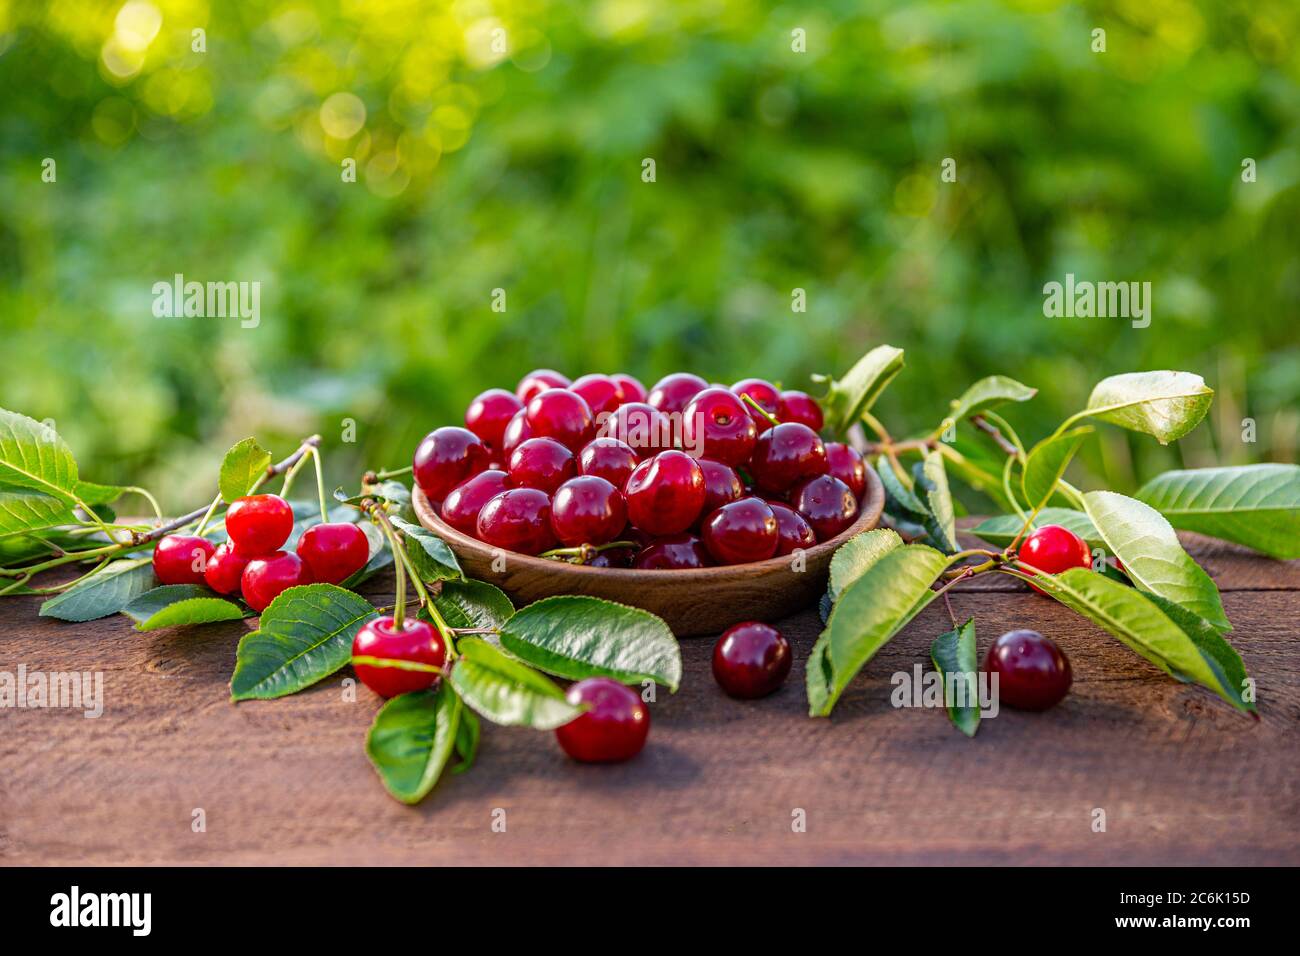 Cherries in a wooden bowl on a wooden table, outdoor shot Stock Photo